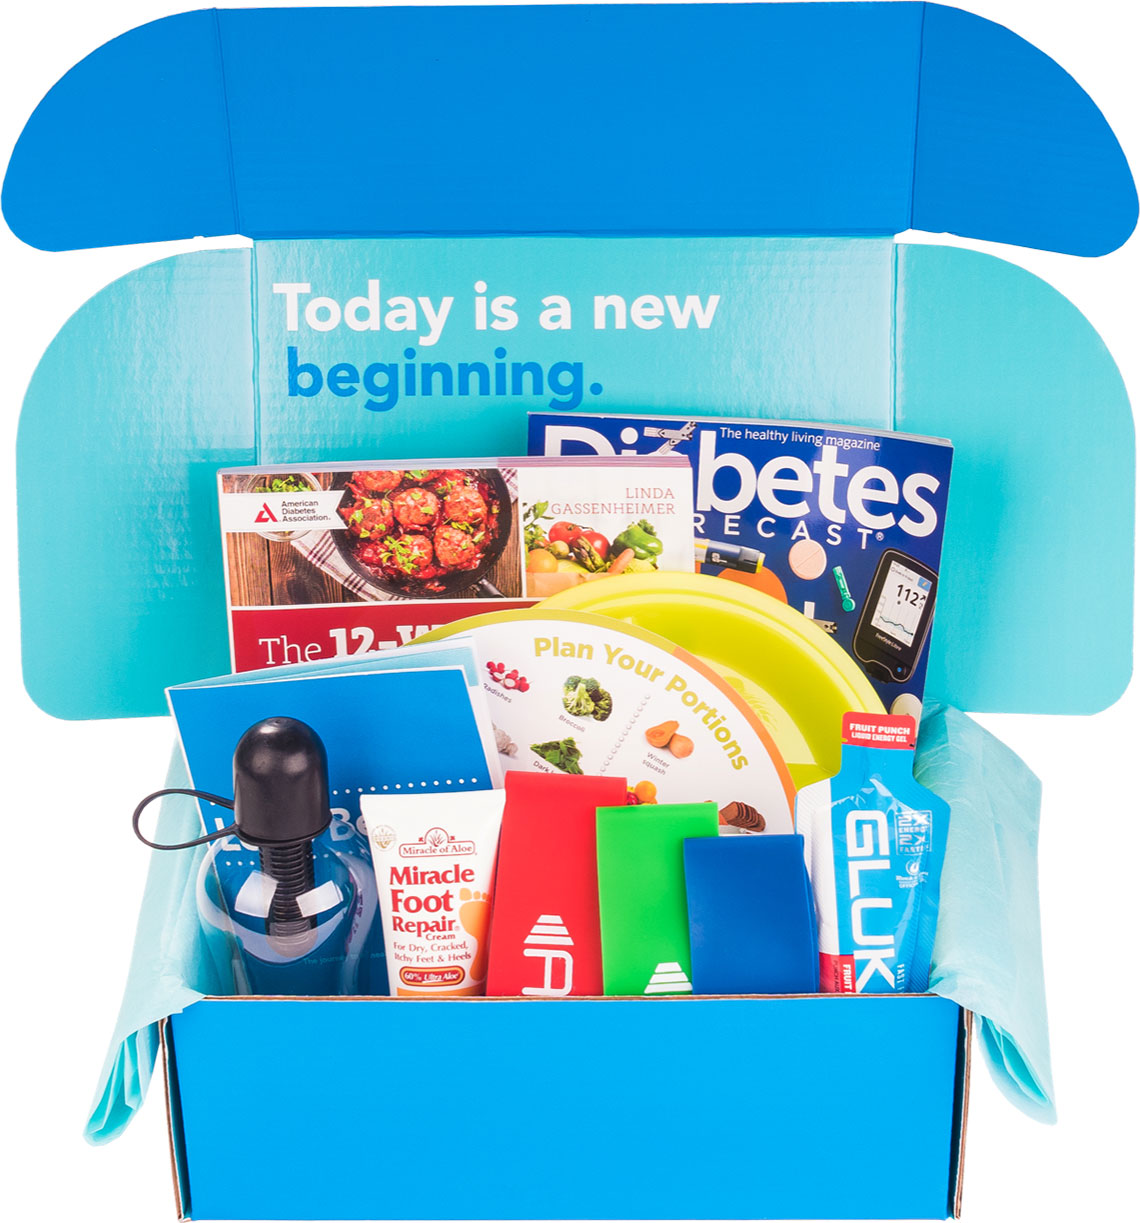 Box full of diabetes-related items including magazines, a cookbook, and other health products